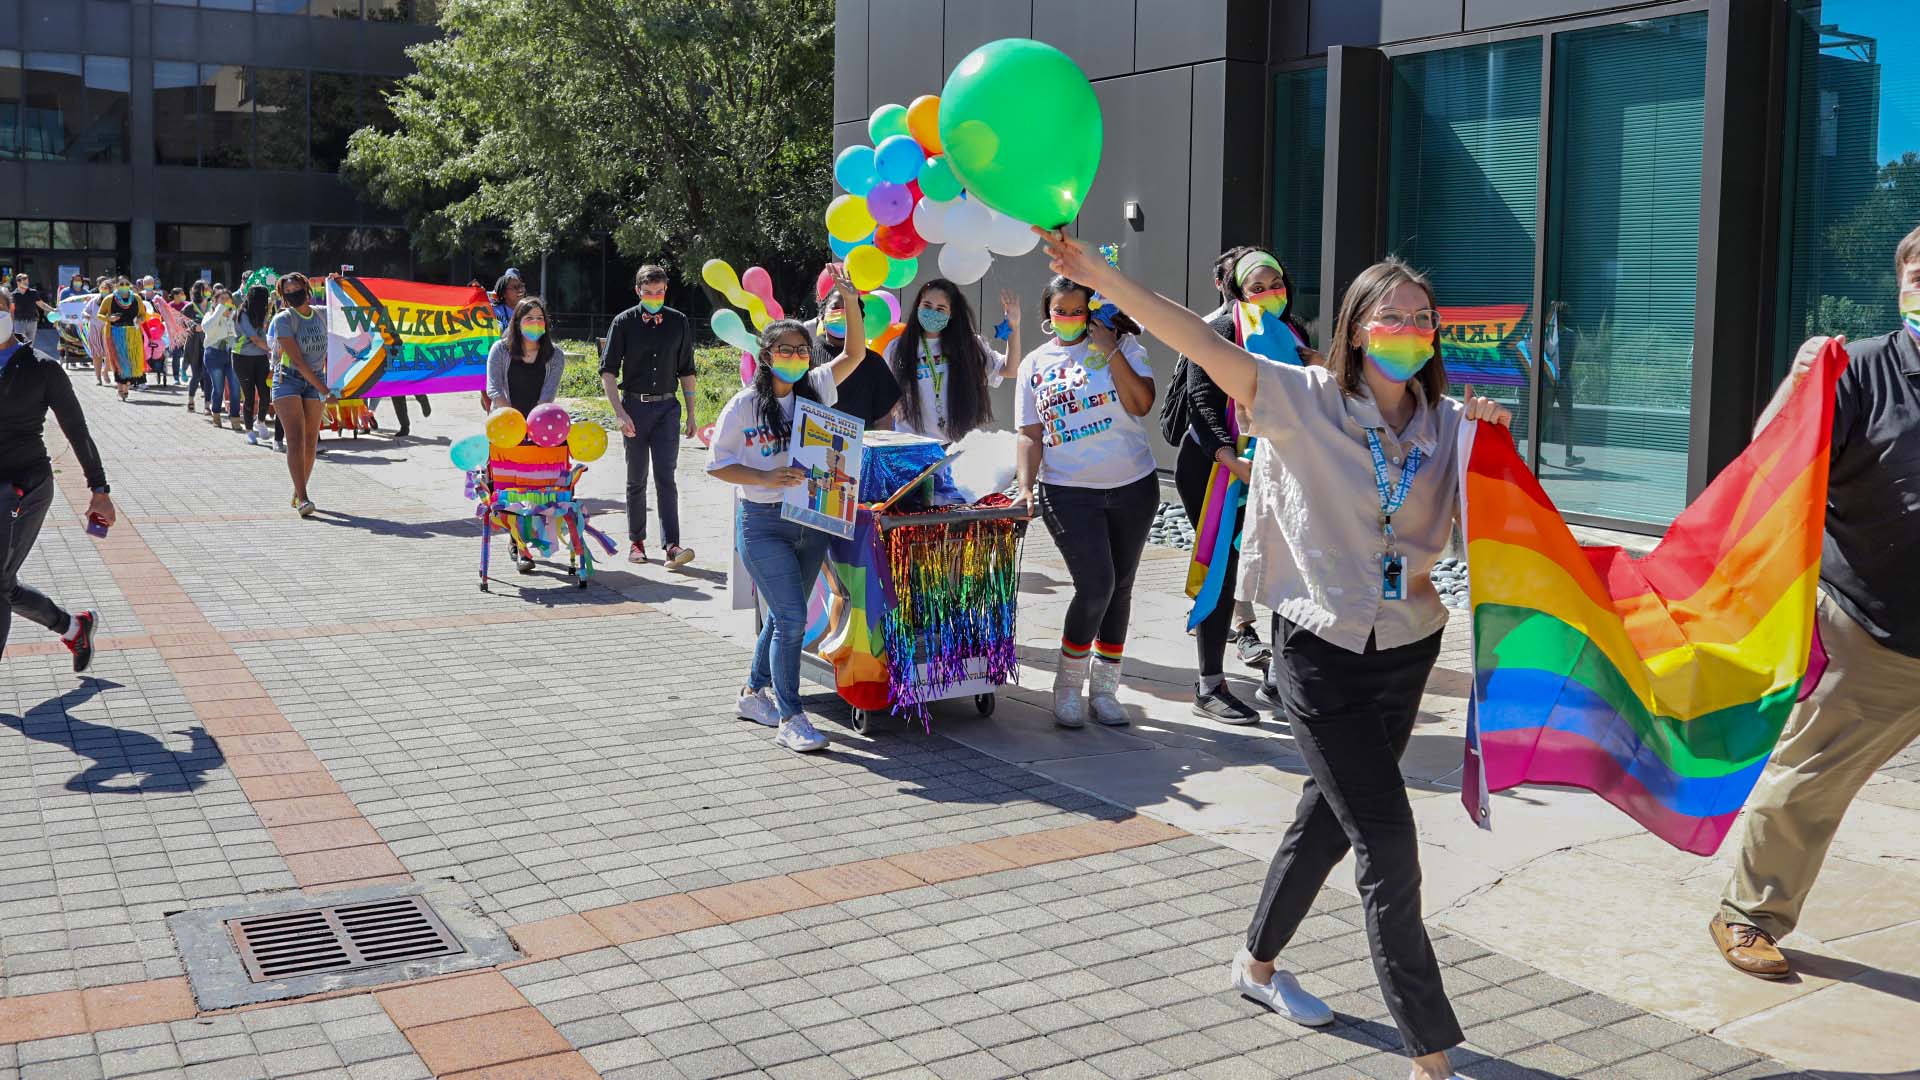 Students, faculty and staff at UHCL pride